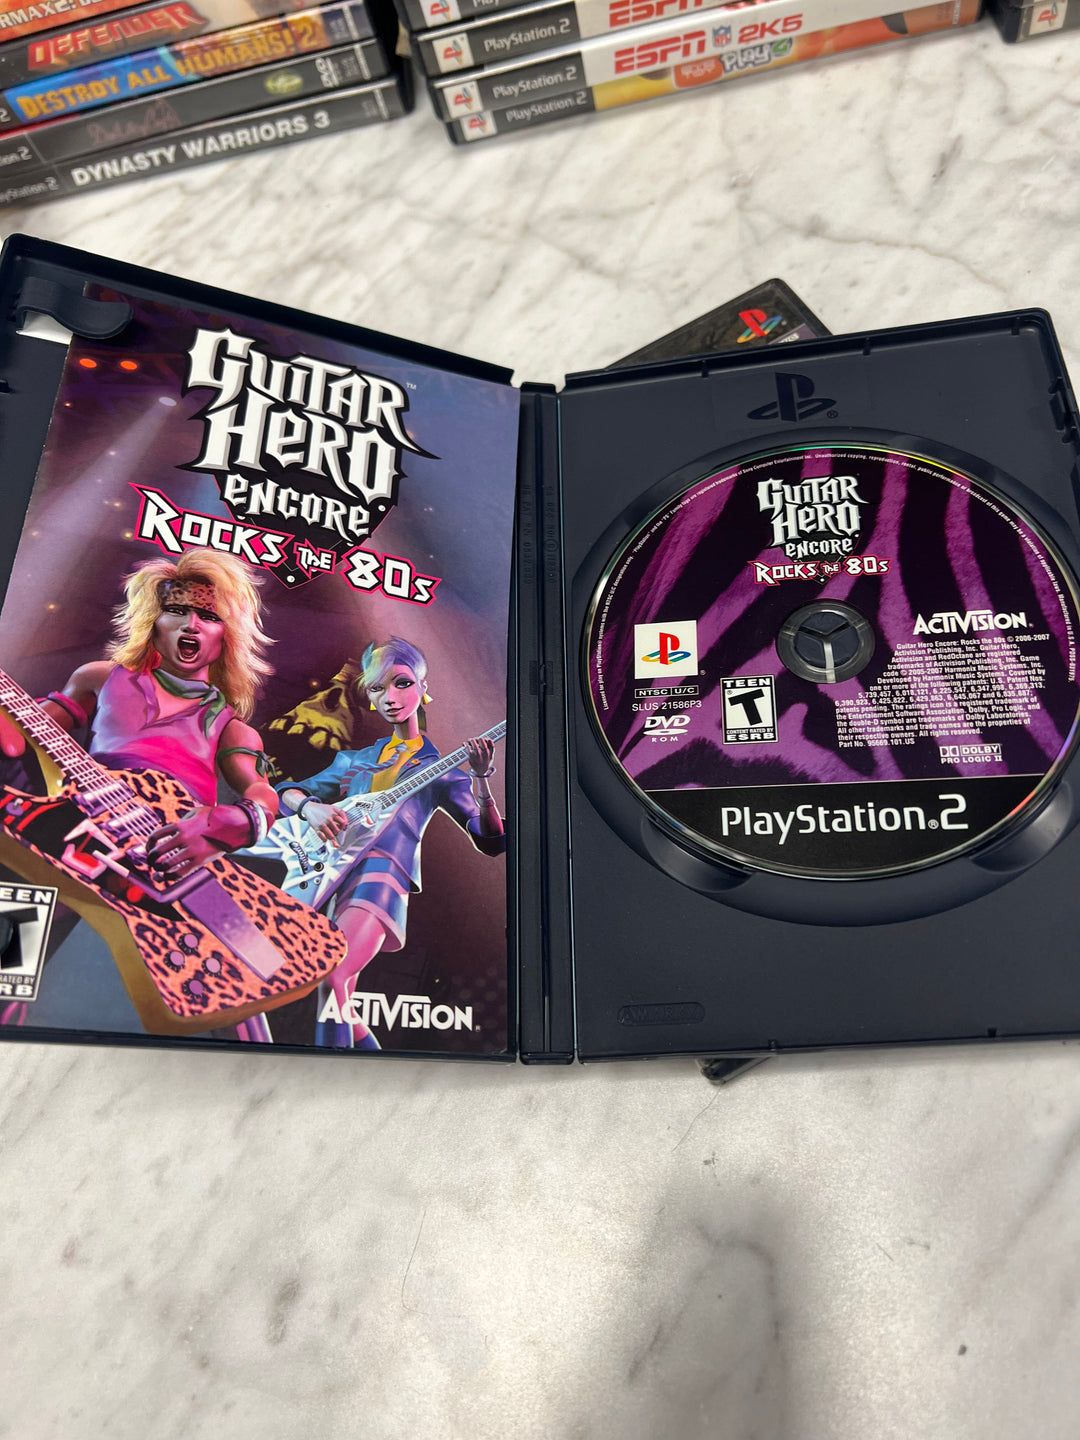 Guitar Hero Encore Rocks The 80's for Playstation 2 PS2 in case. Tested and Working.     DO62924